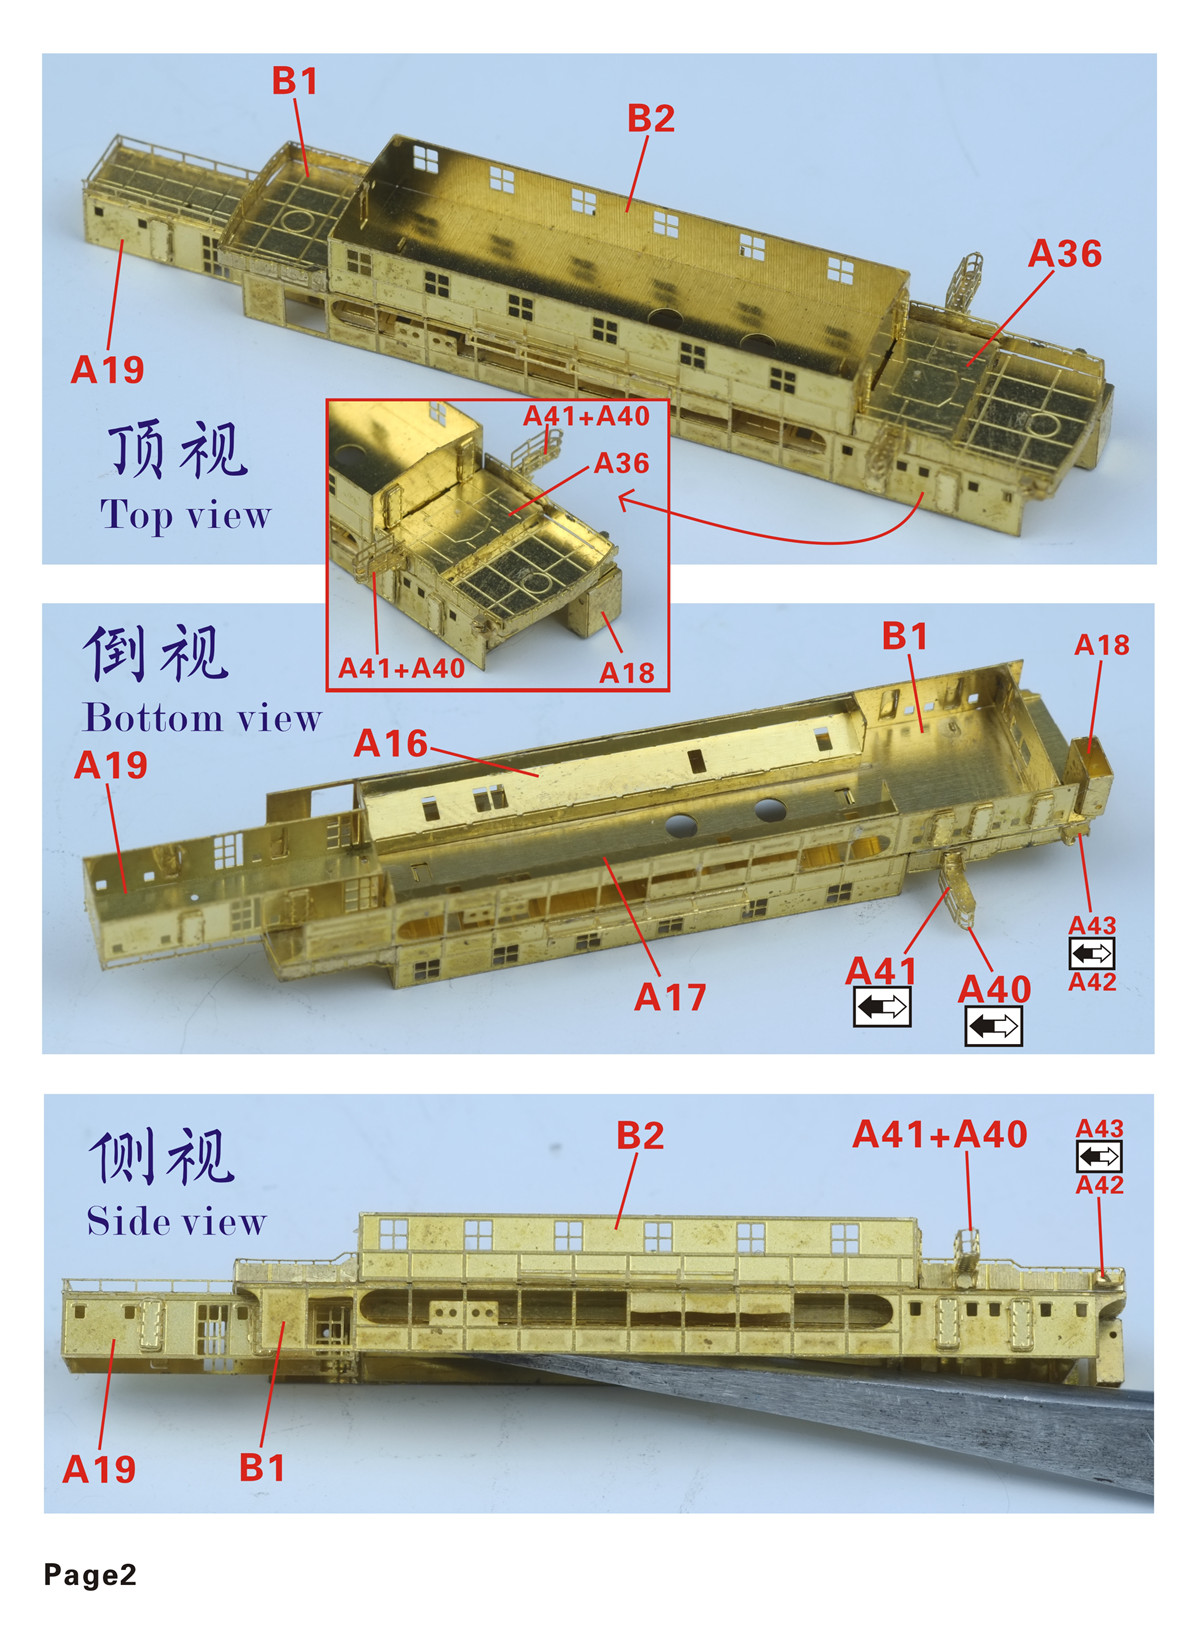 1/700 WWII IJN Gunboat Toba Resin Kit - Click Image to Close